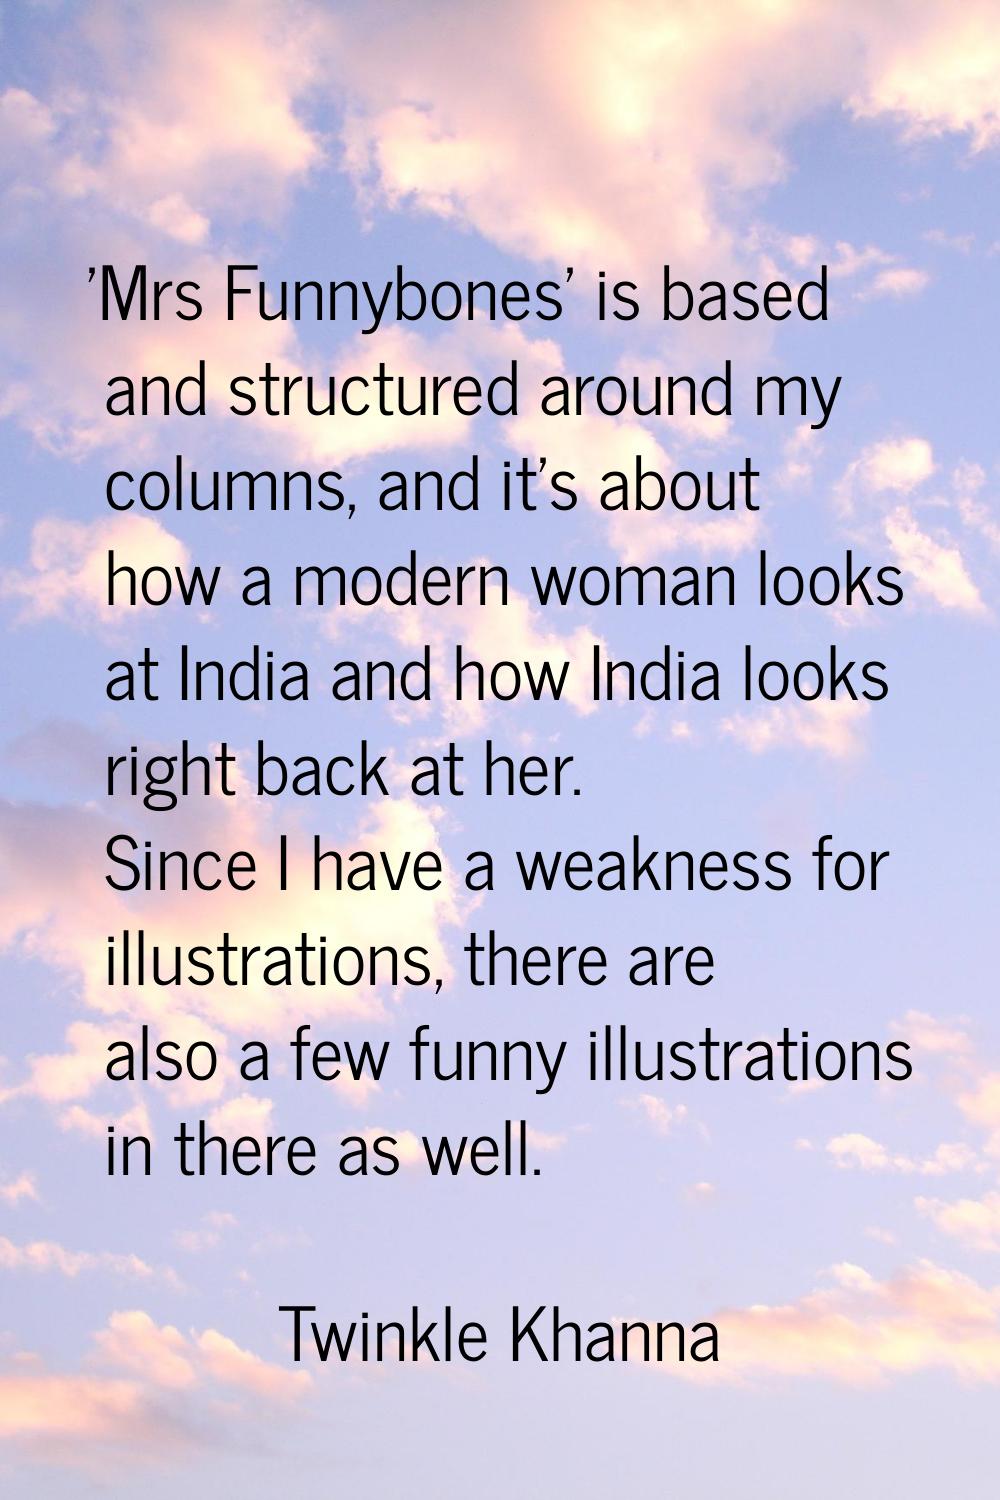 'Mrs Funnybones' is based and structured around my columns, and it's about how a modern woman looks